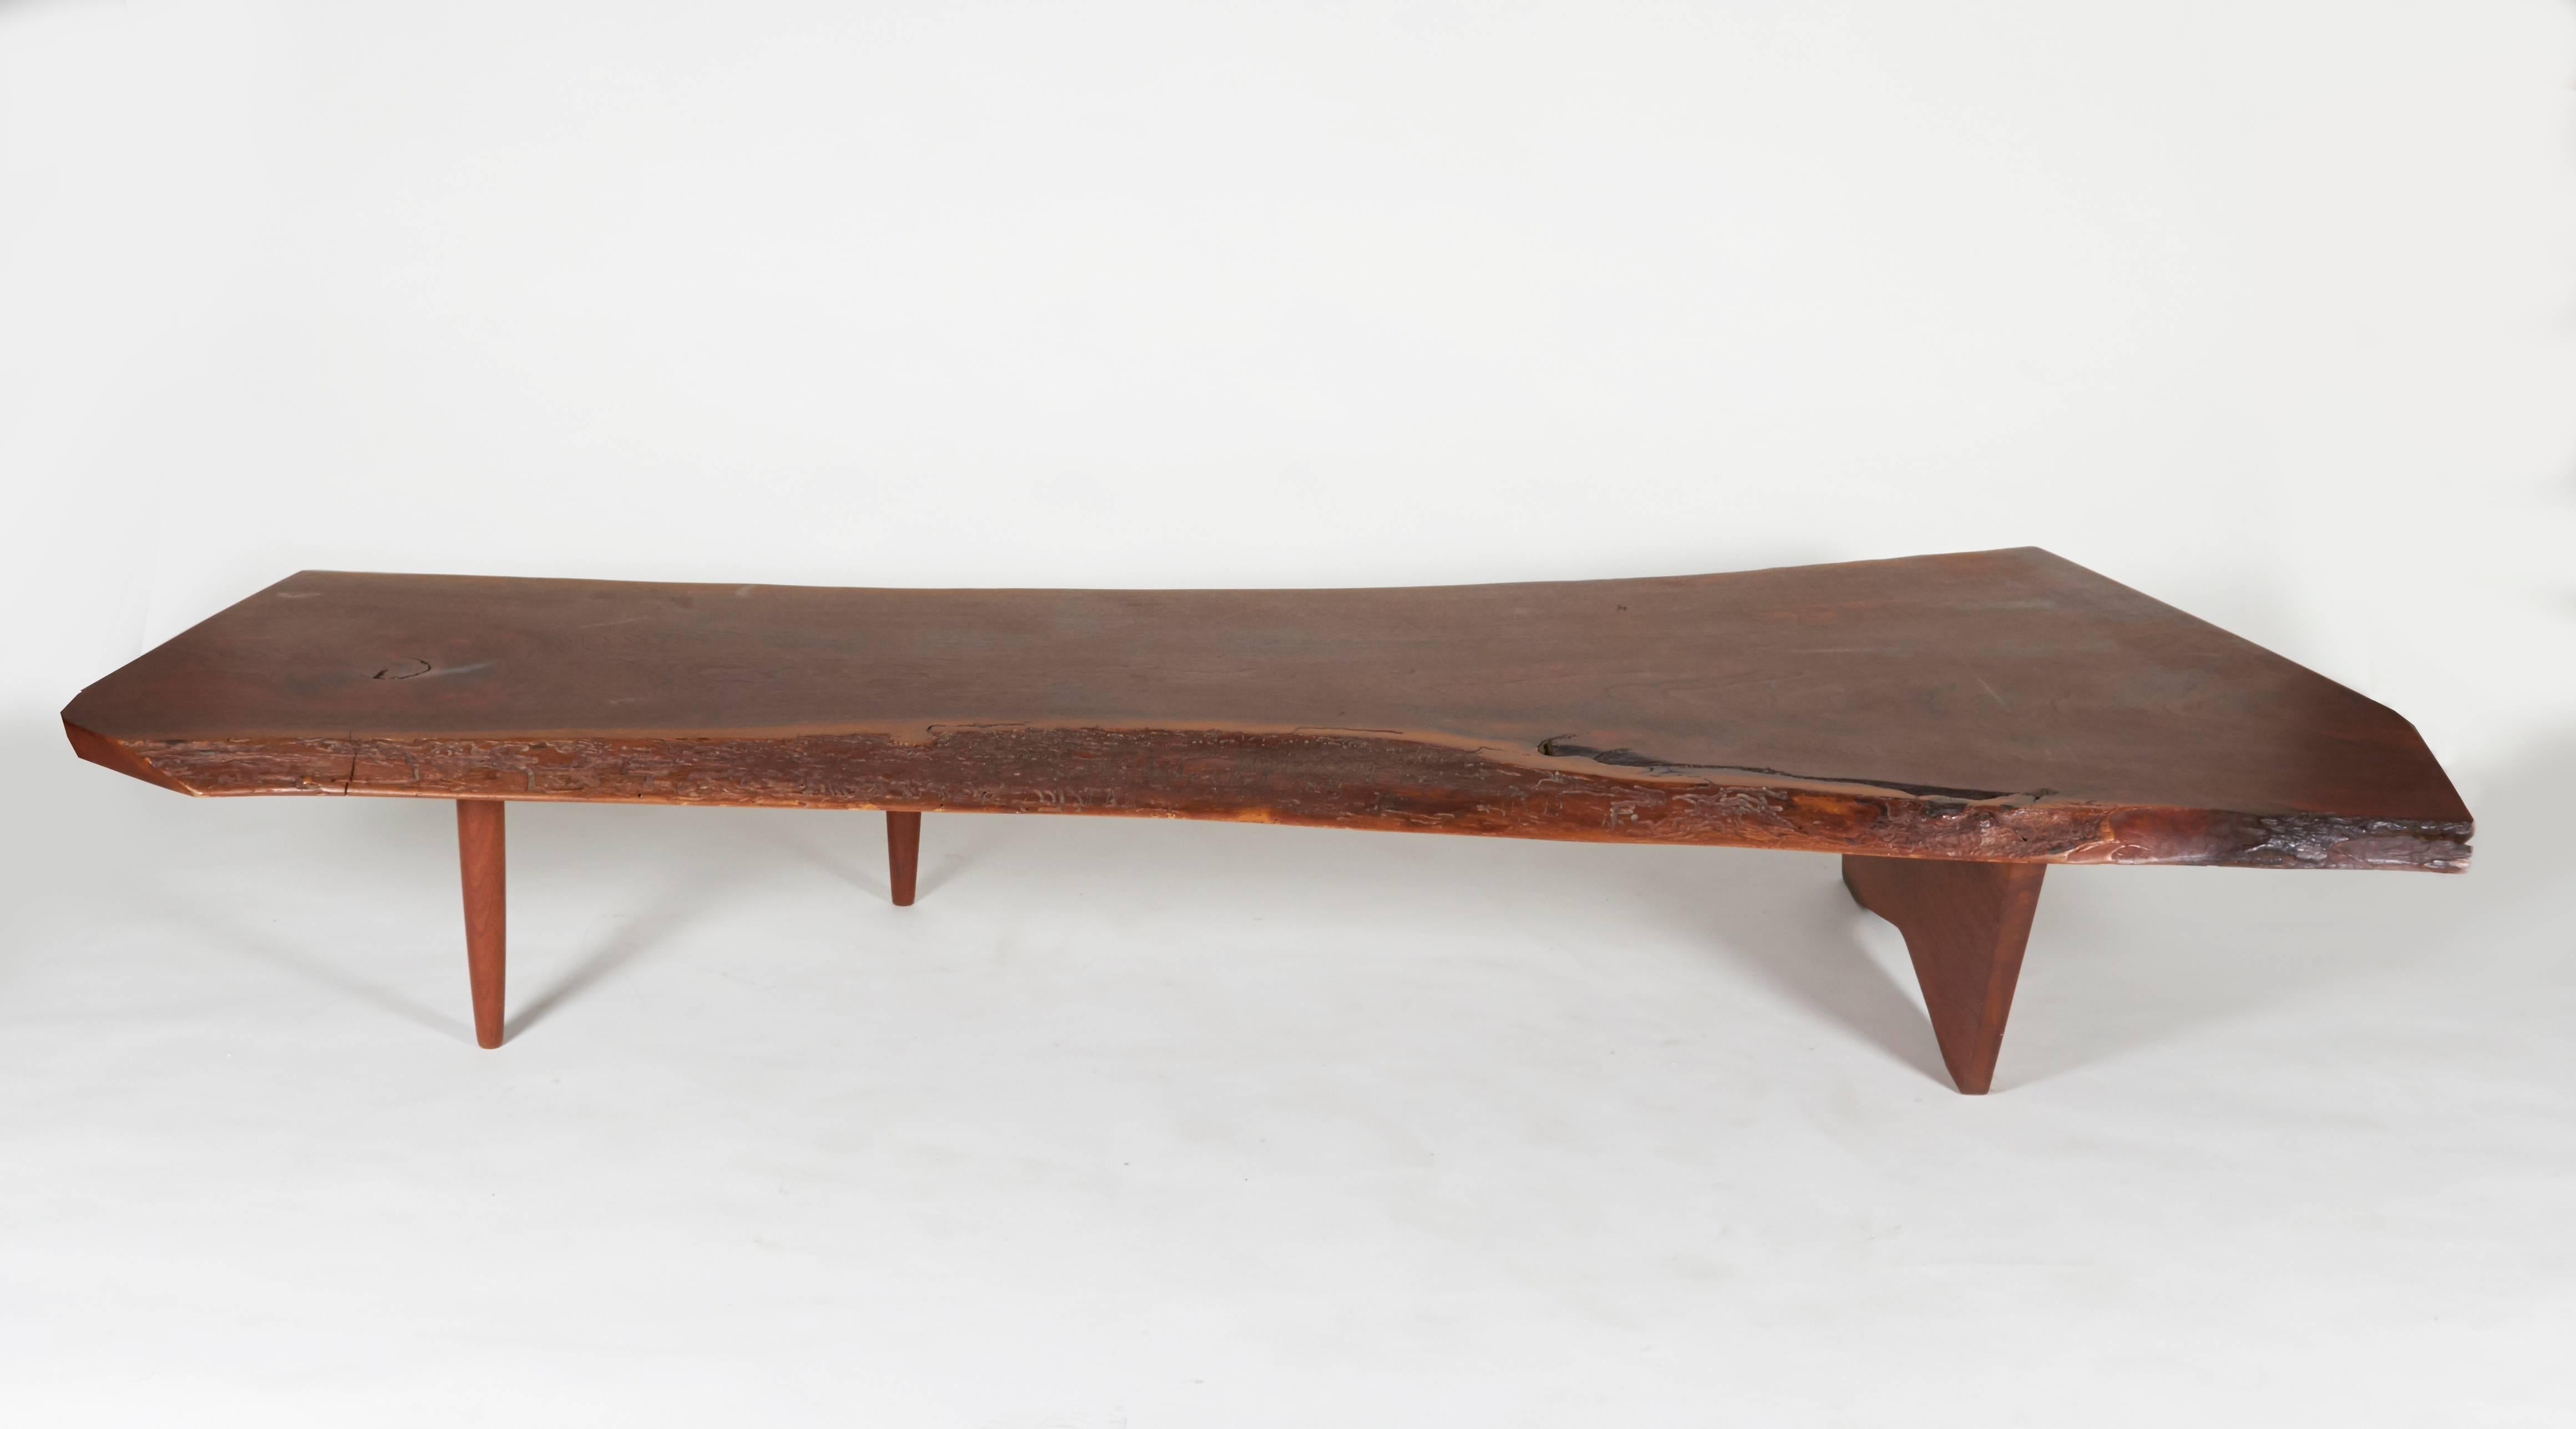 All of the wonderful qualities you expect from George Nakashima. It has an outstanding free edge form with beautiful irregularities in the grain.